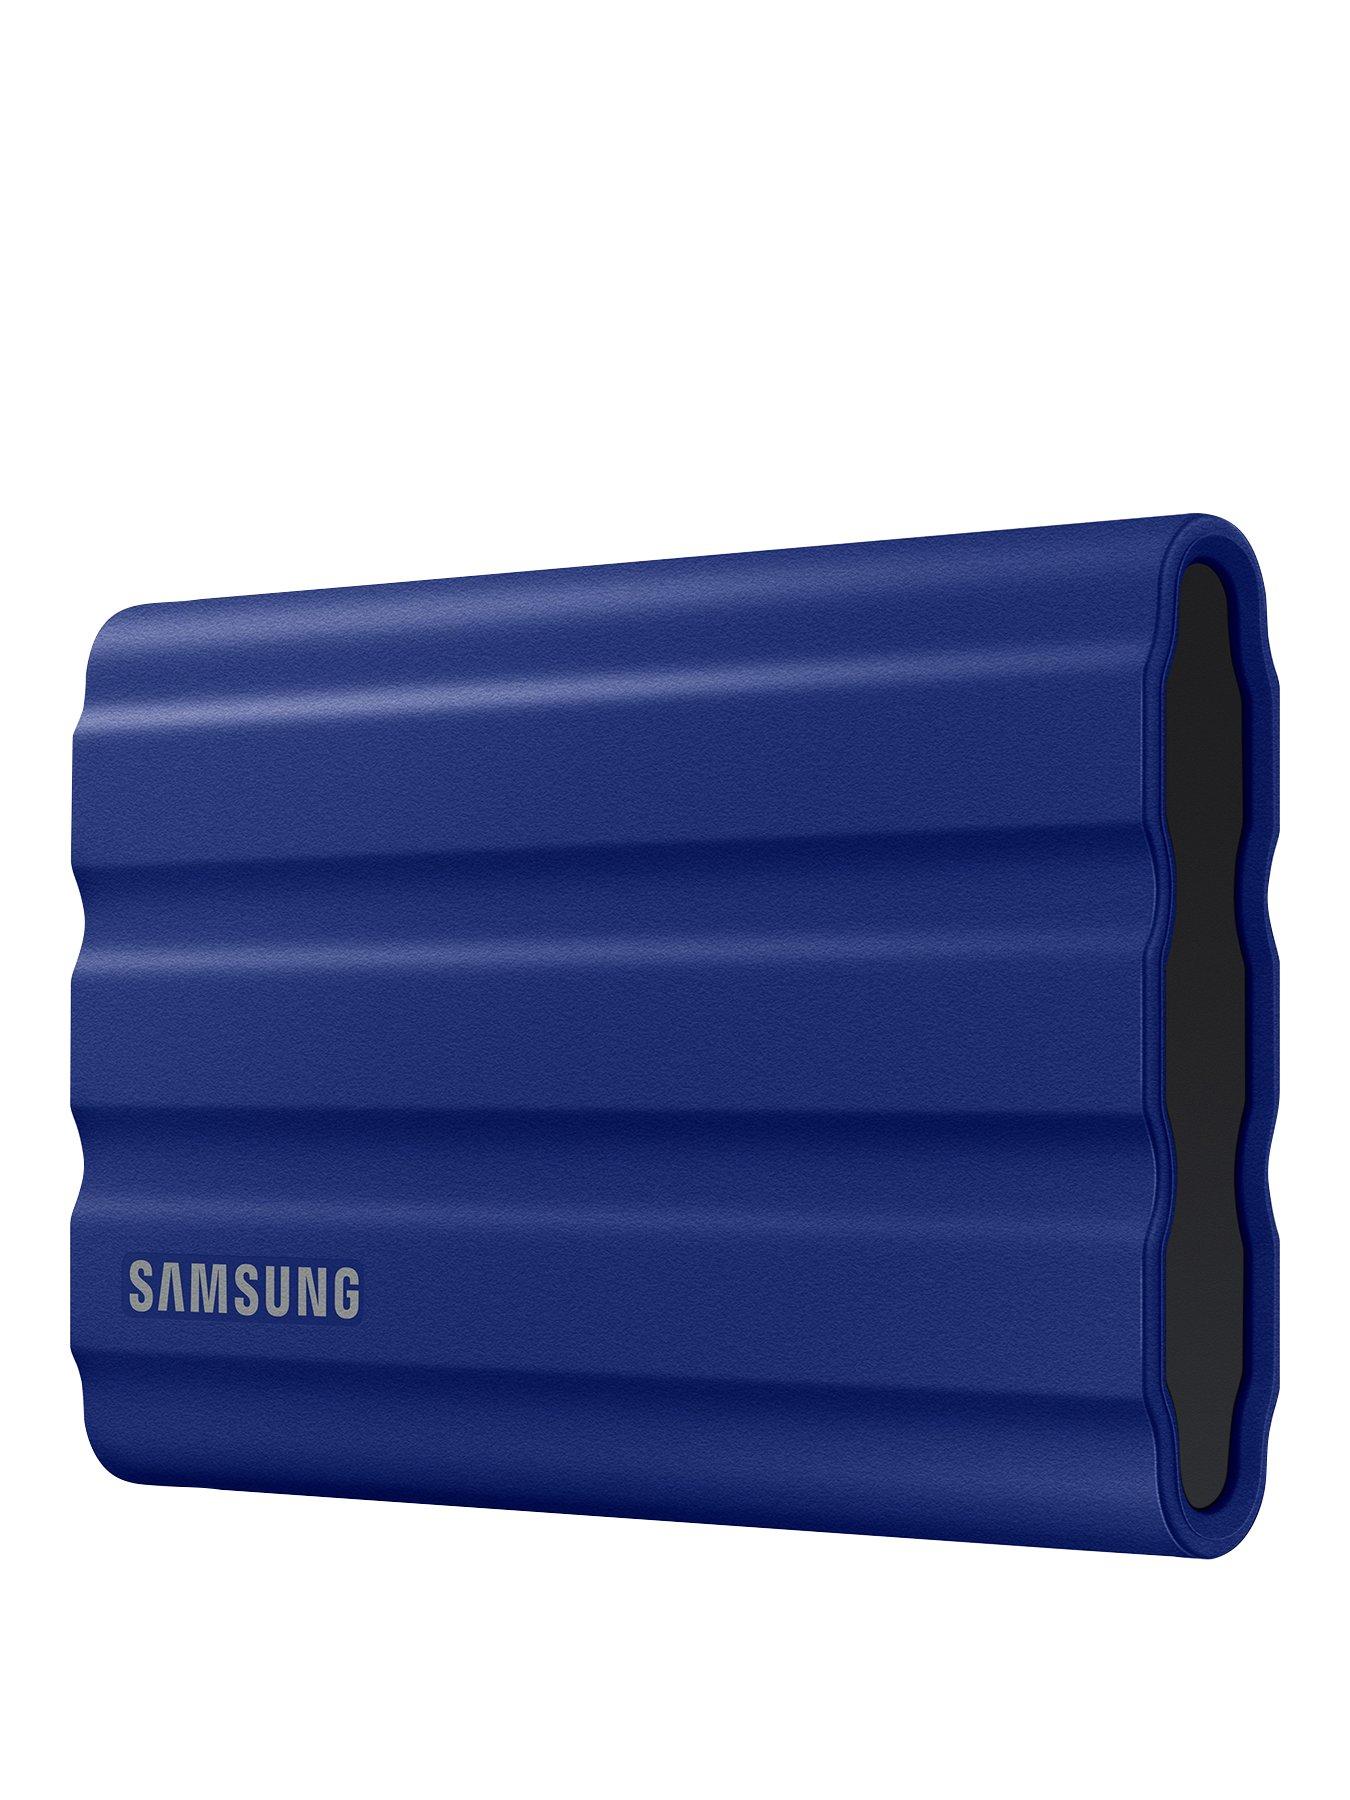 Review: Samsung T7 Shield Portable SSD - Australian Photography